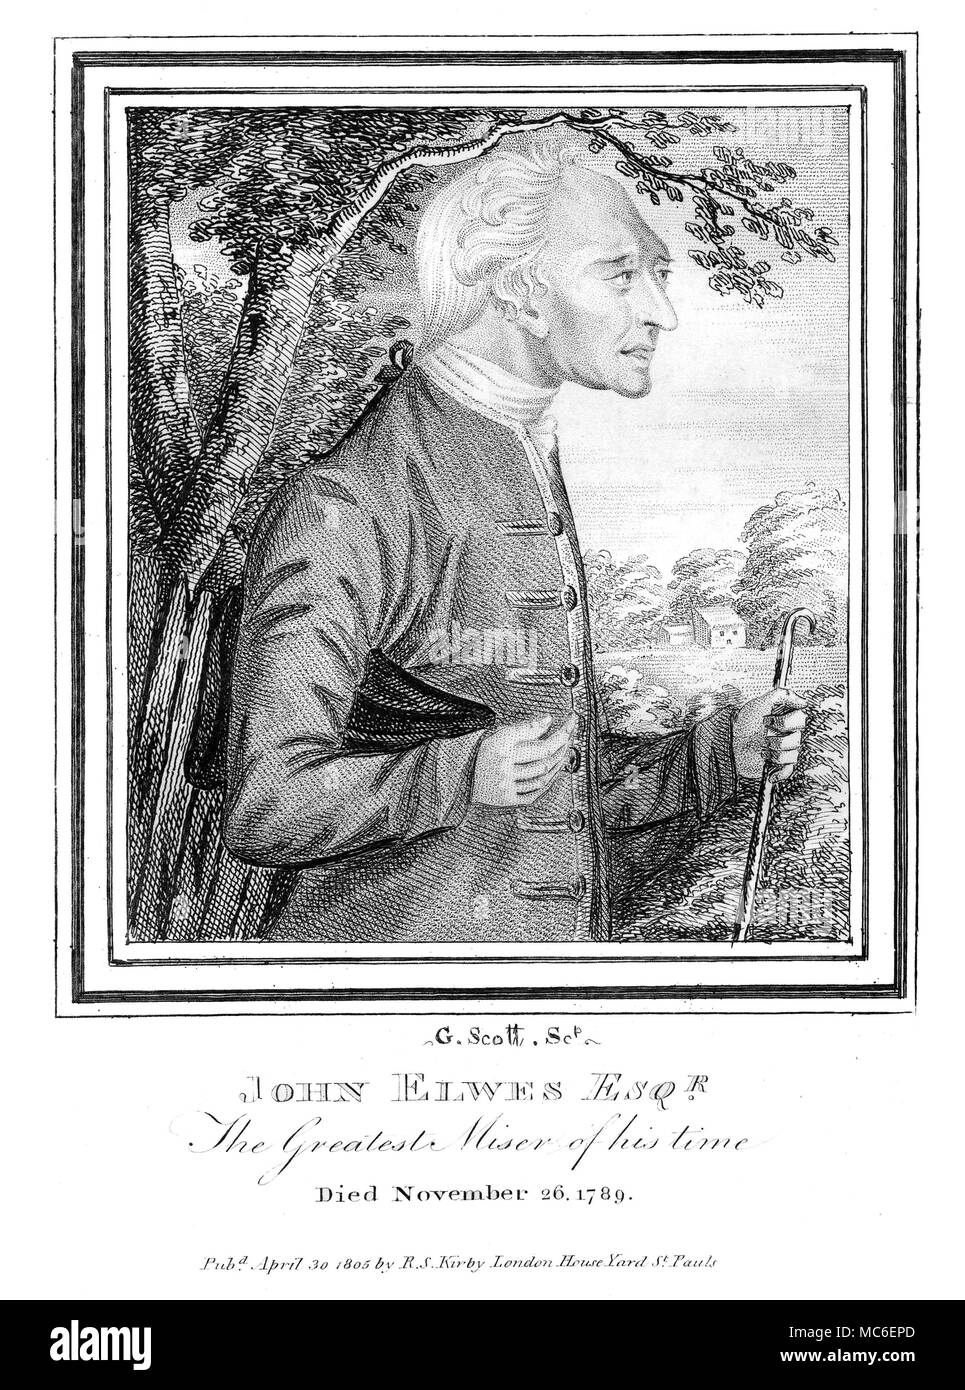 STRANGE PHENOMENA - MISER Portrait of John Elwes, reputed to be the greatest miser of his day. He died on 26 November 1789. Engraving of 1805. Engraving used in Kirby's Wonderful and Eccentric Museum; or, Magazine of Remarkable Characters, 1820. Stock Photo